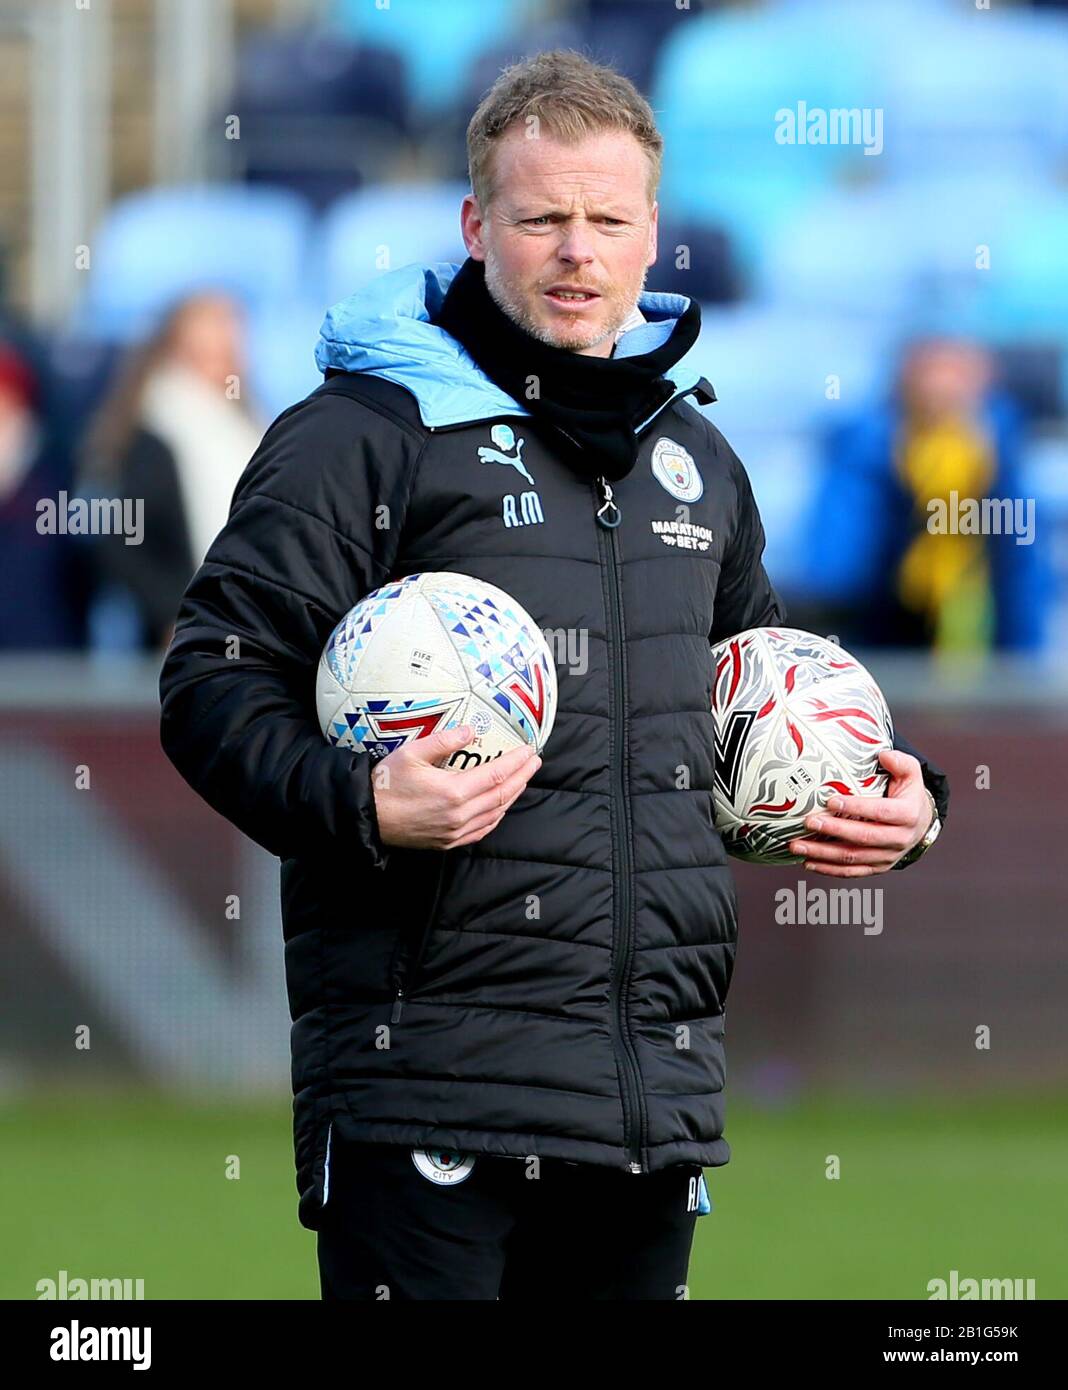 Manchester City Women's manager Alan Mahon during the pre-match warm up prior to the beginning of the Women's Super League match at the Academy Stadium, Manchester. Stock Photo